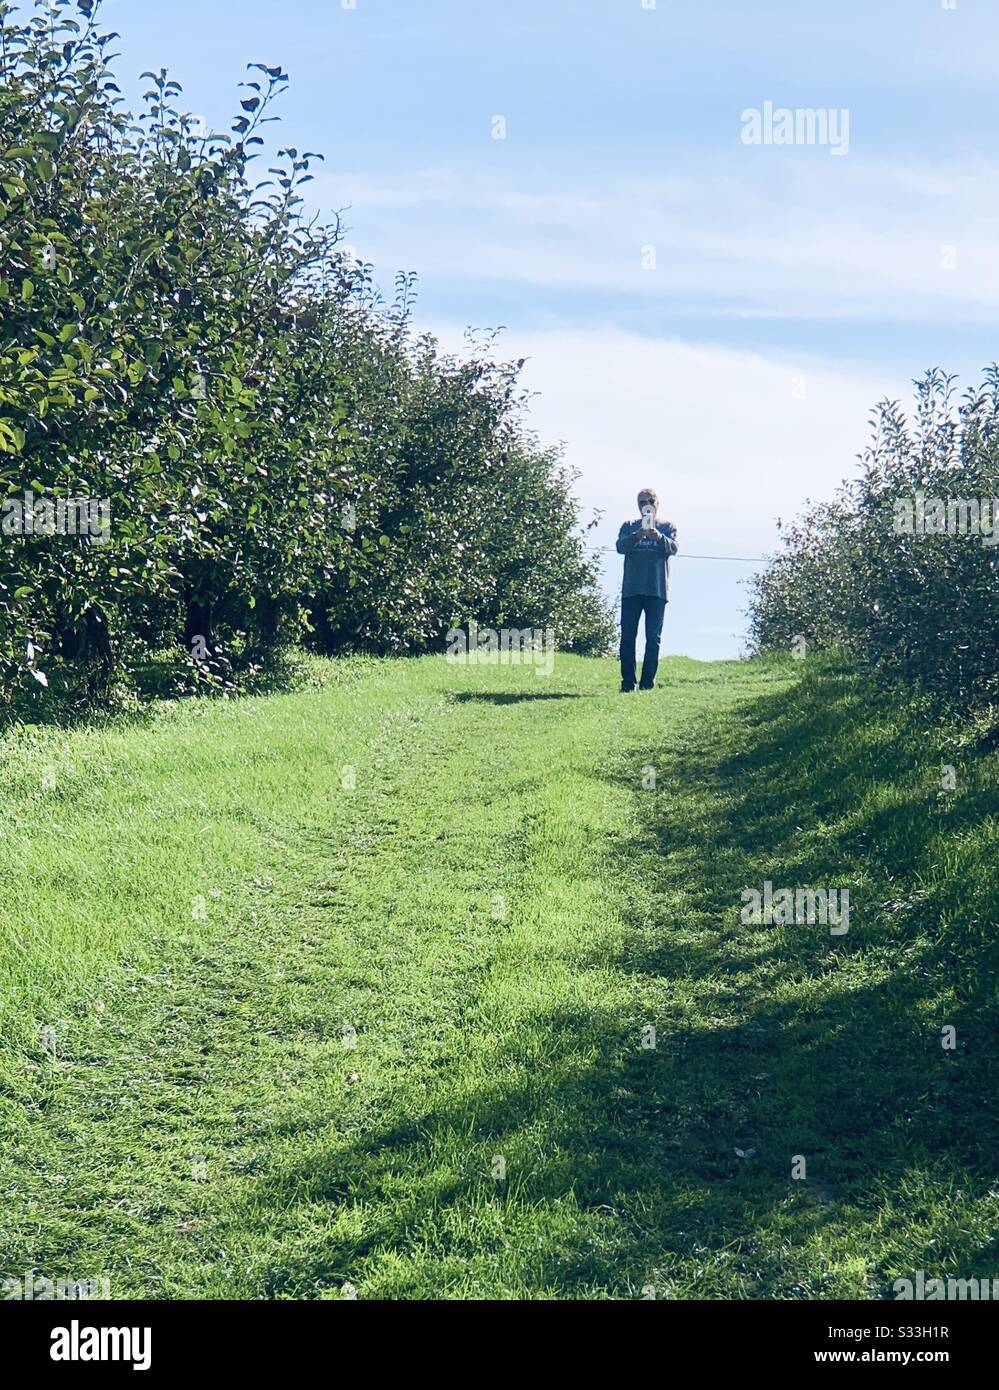 DUBUQUE, IOWA, 10/20/19--Landscape photo of caucasion man taking photo of me taking his photo on a bright sunny fall day in an apple orchard during a festival. Stock Photo